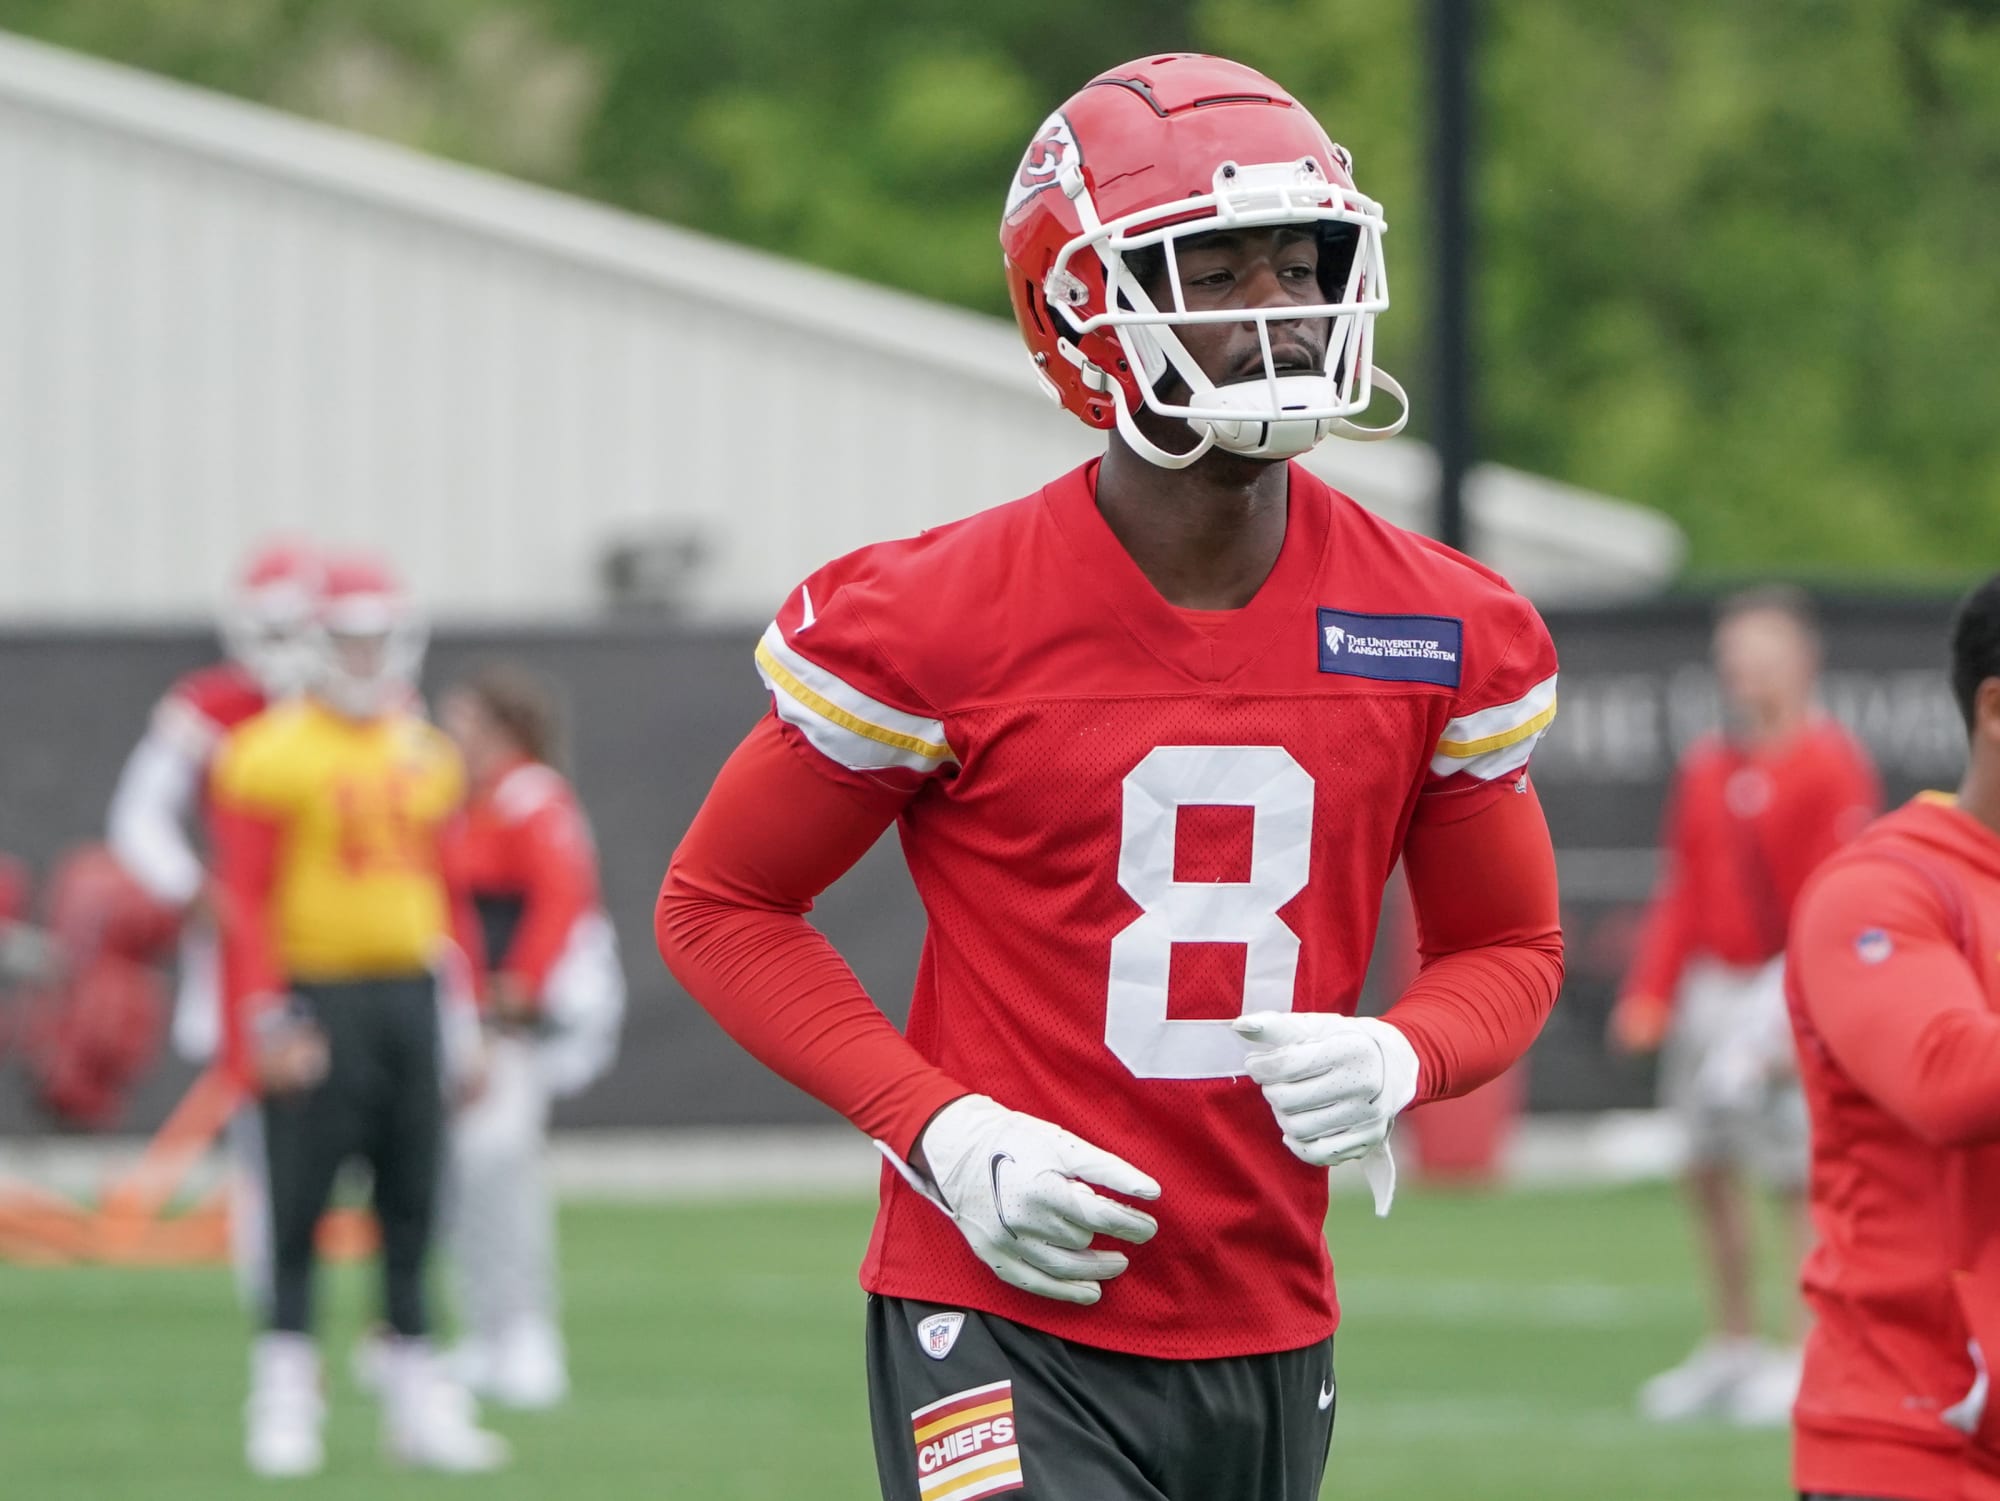 Chiefs getting a scary weapon for Patrick Mahomes back from injury